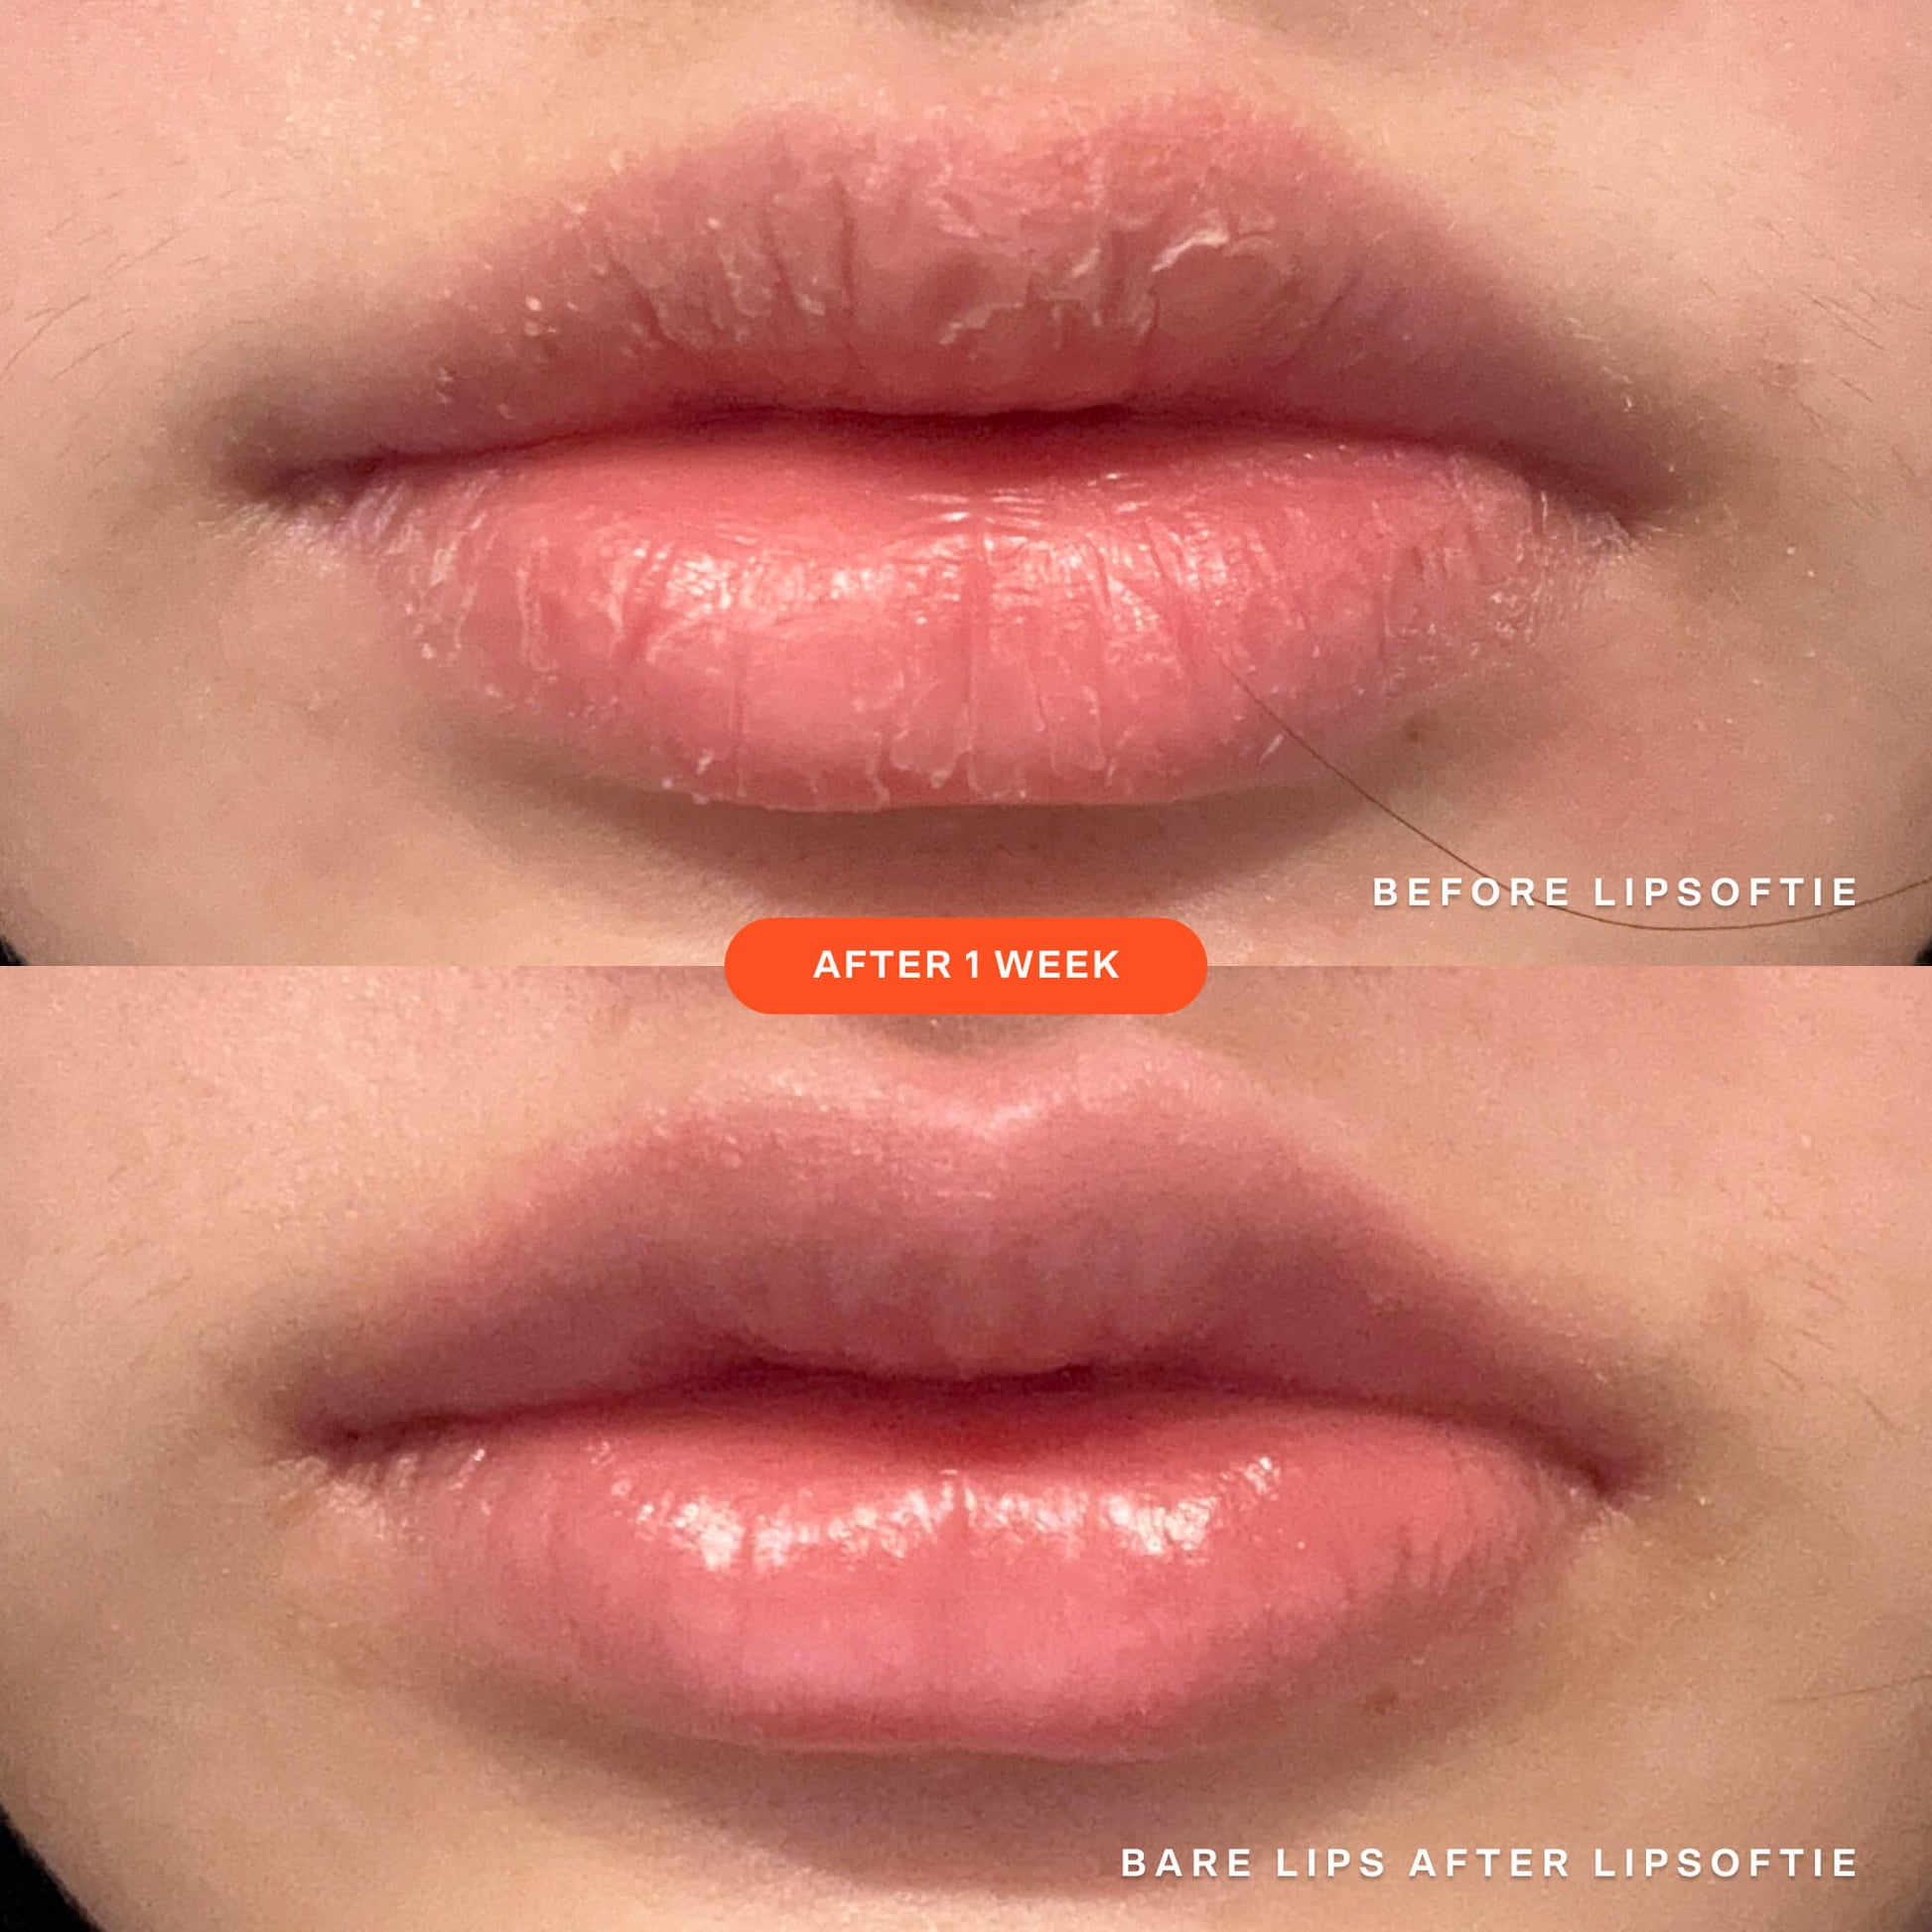 [A before and after image of the same lips showcasing the effectiveness of Tower 28 Beauty's LipSoftie™ Lip Treatment in SOS Vanilla after one week of use